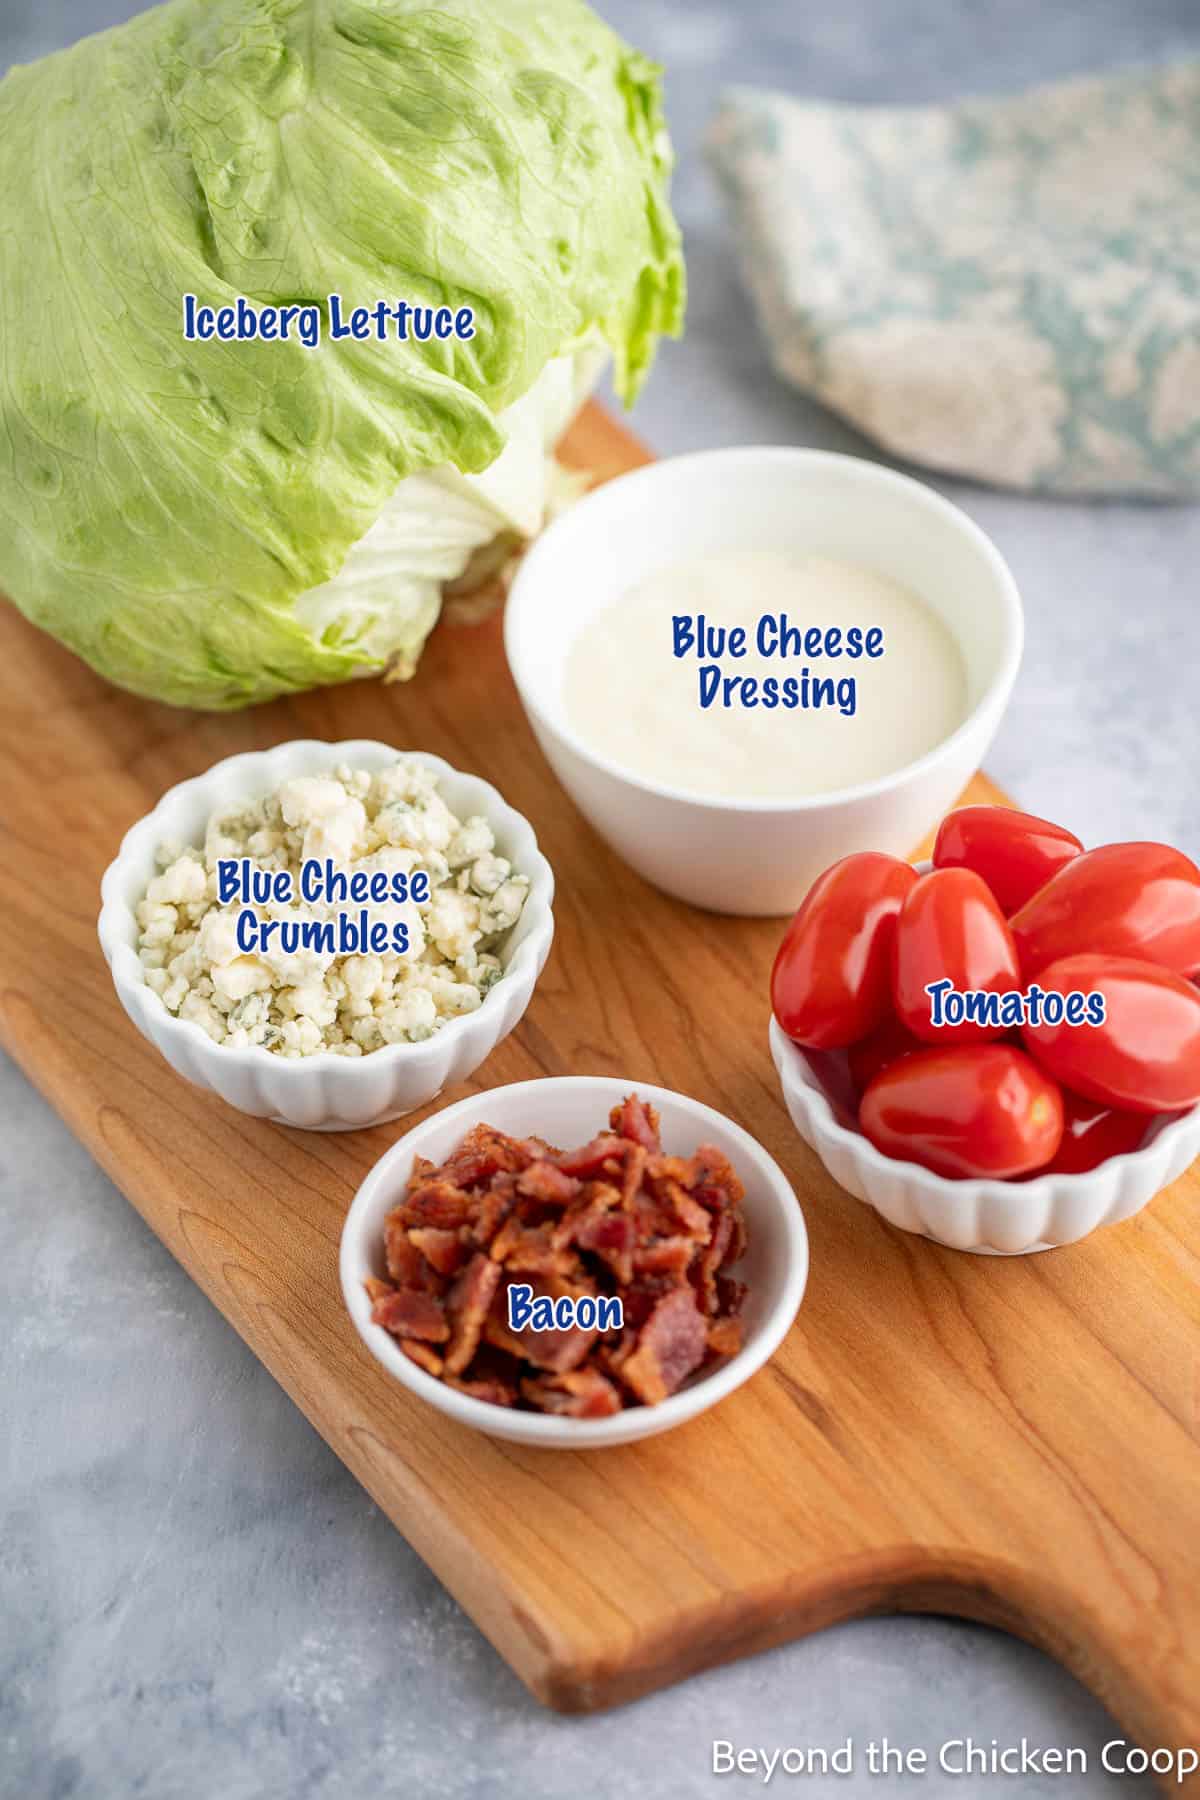 Ingredients for making a wedge salad.